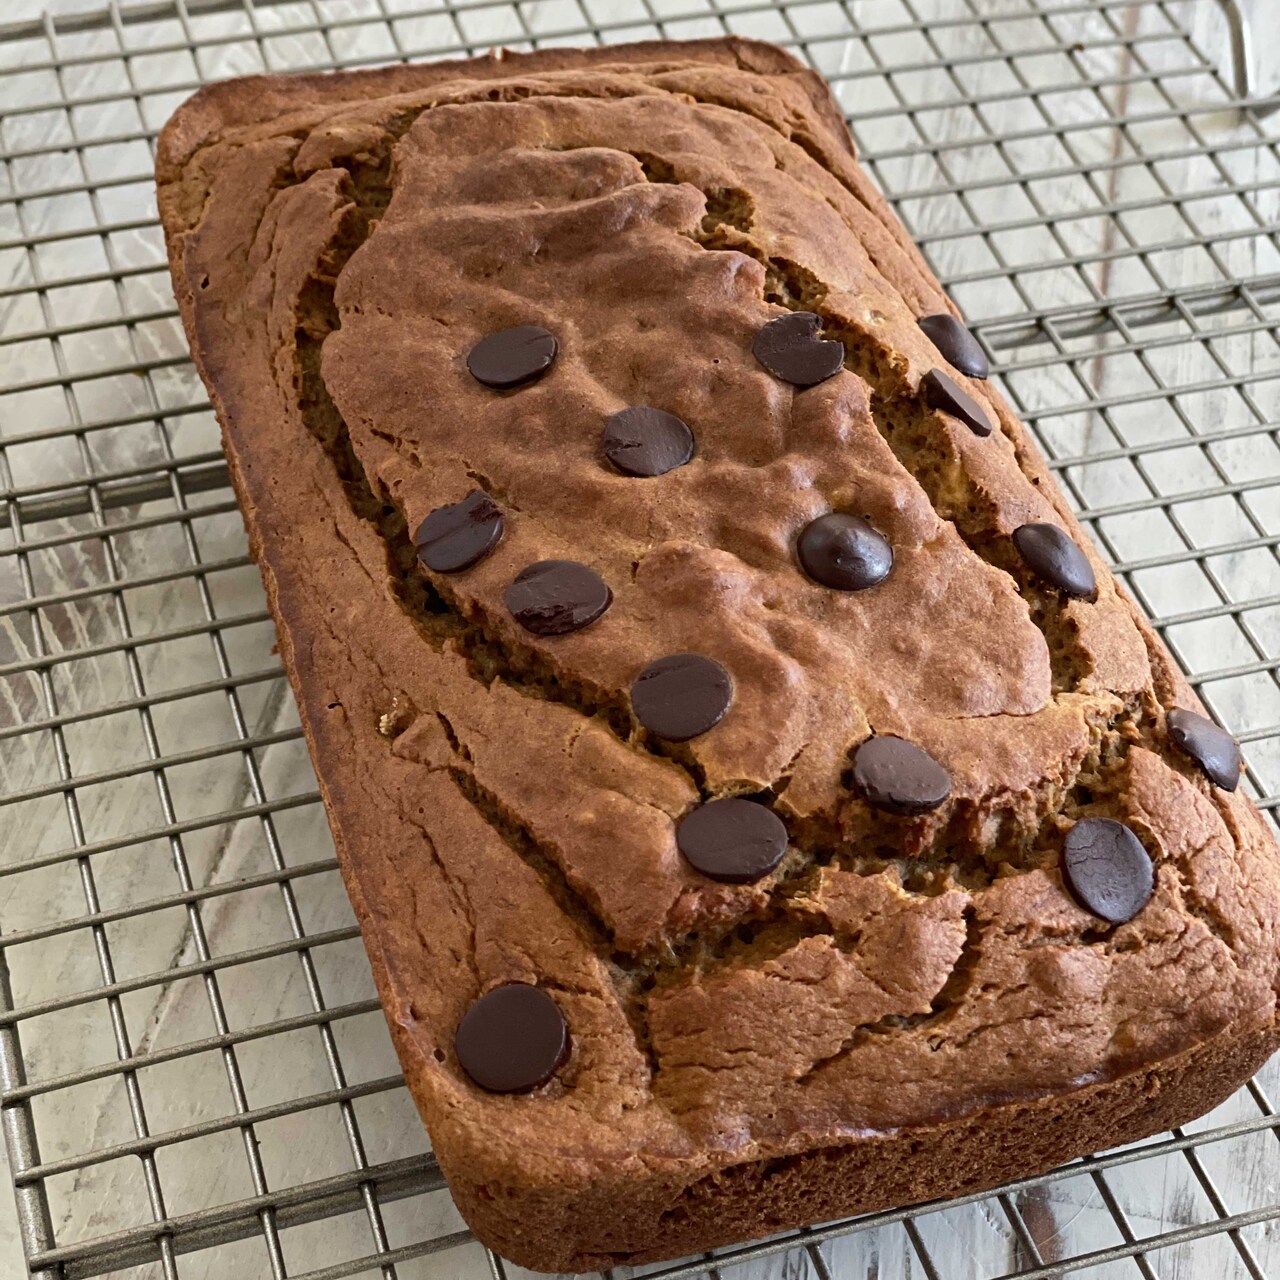 Gluten, Nut and Dairy Free Banana Bread & Frosting